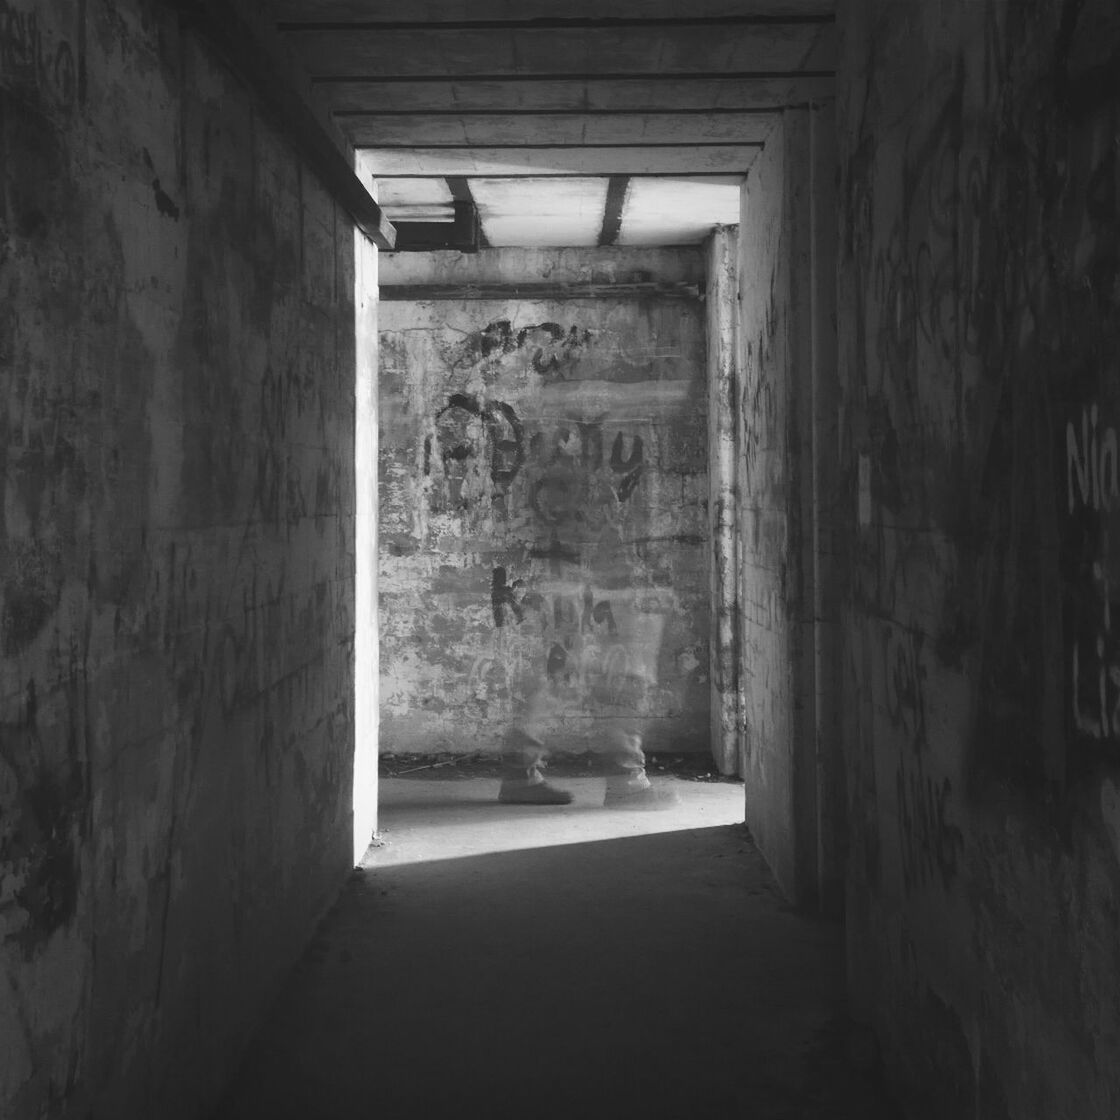 indoors, architecture, built structure, the way forward, wall - building feature, window, old, building, abandoned, wall, corridor, diminishing perspective, interior, no people, day, sunlight, empty, tunnel, arch, history